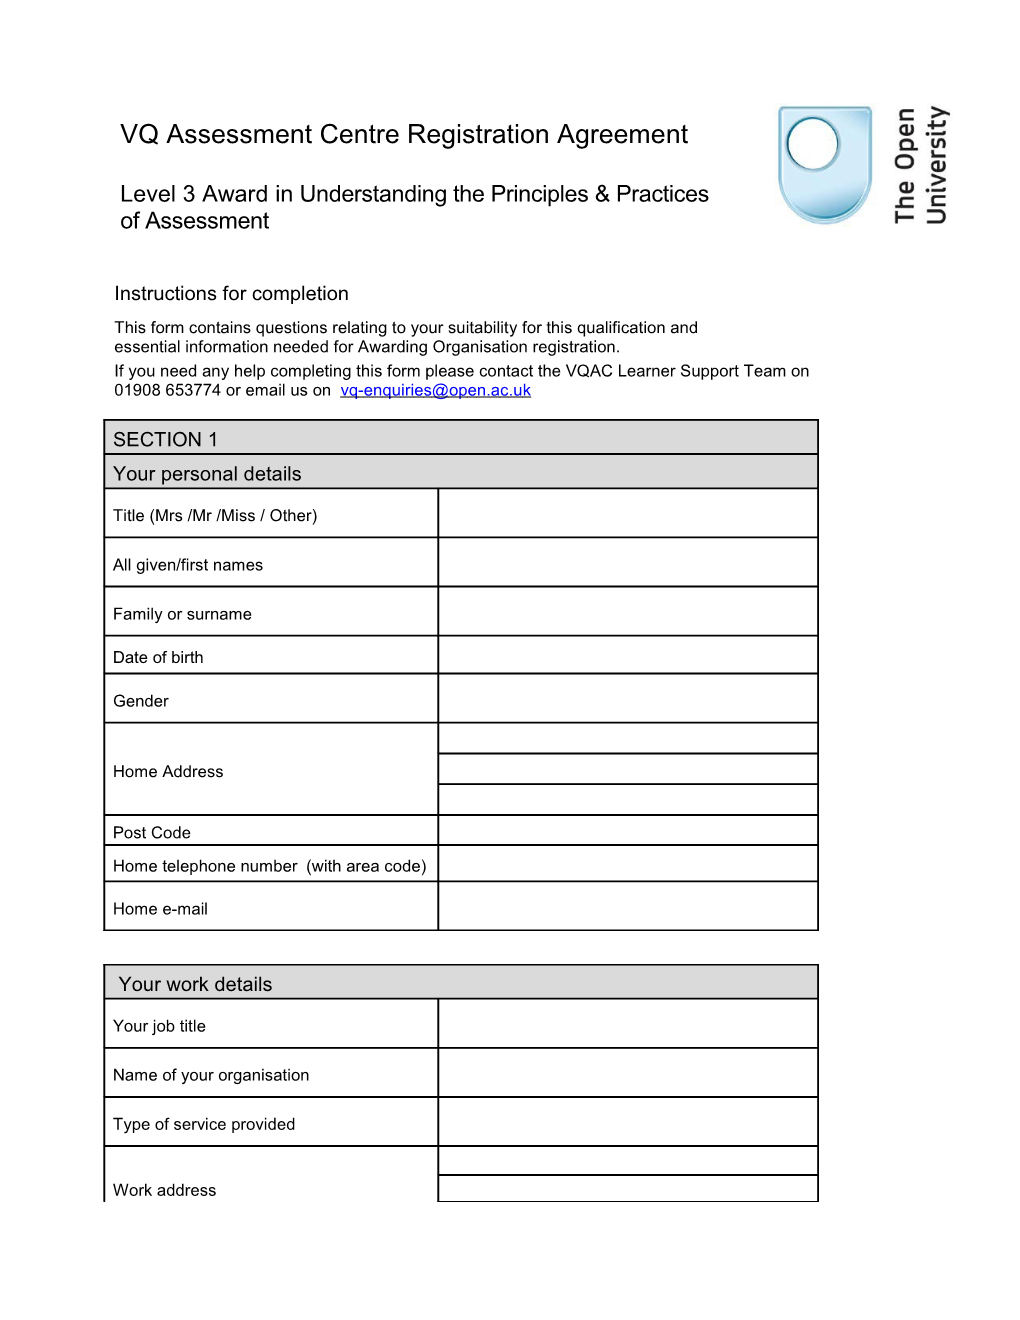 Registration Agreement Form with the VQ Assessment Centre